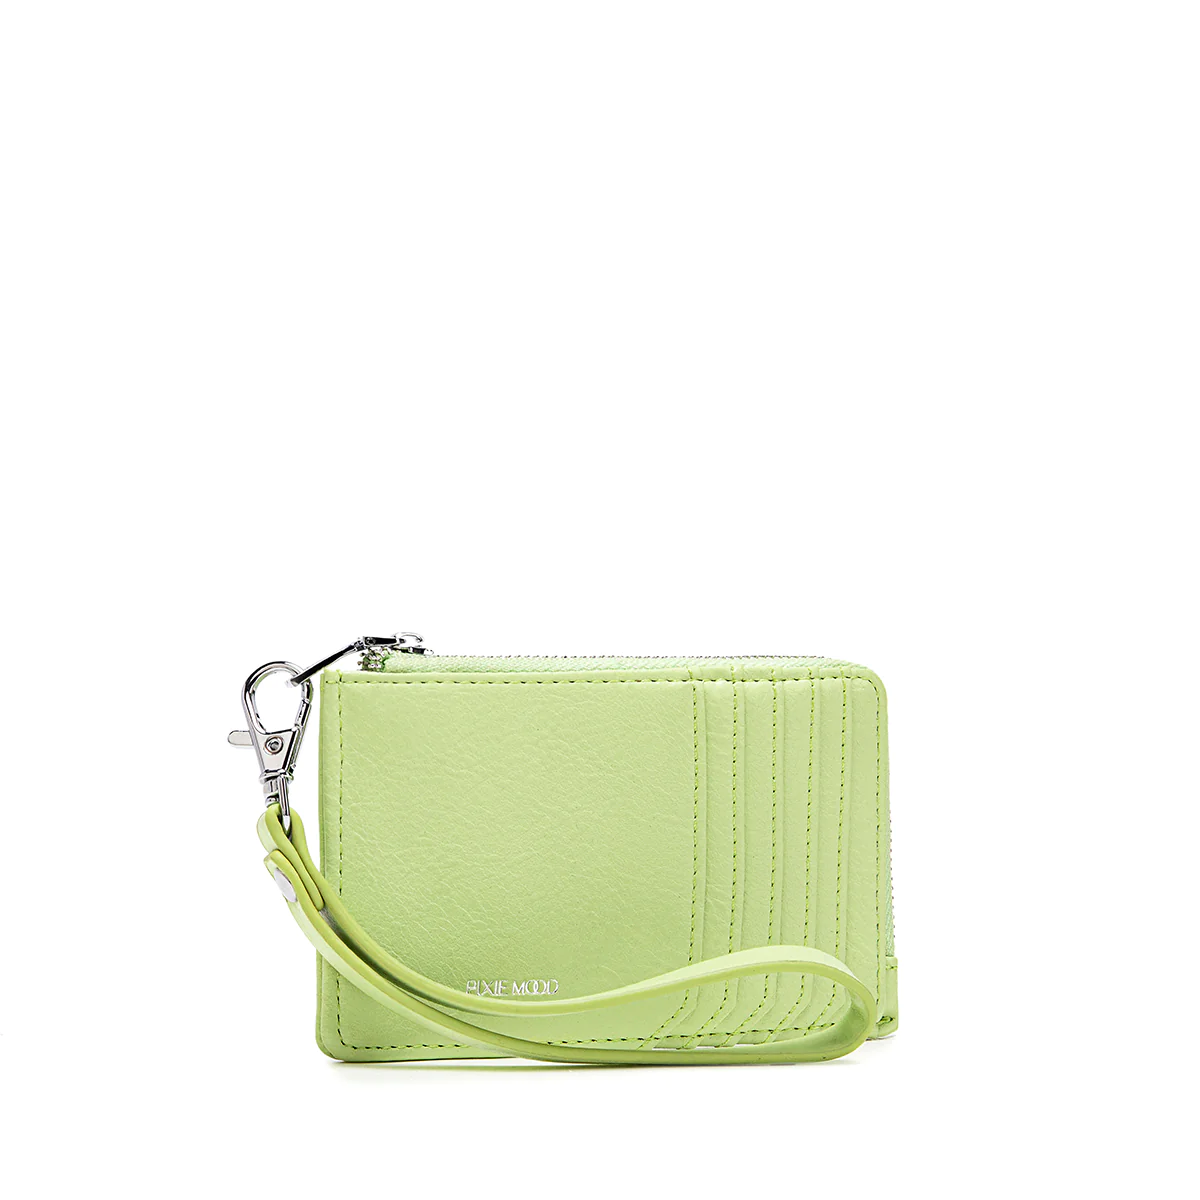 Quinn Card Wallet in Lime